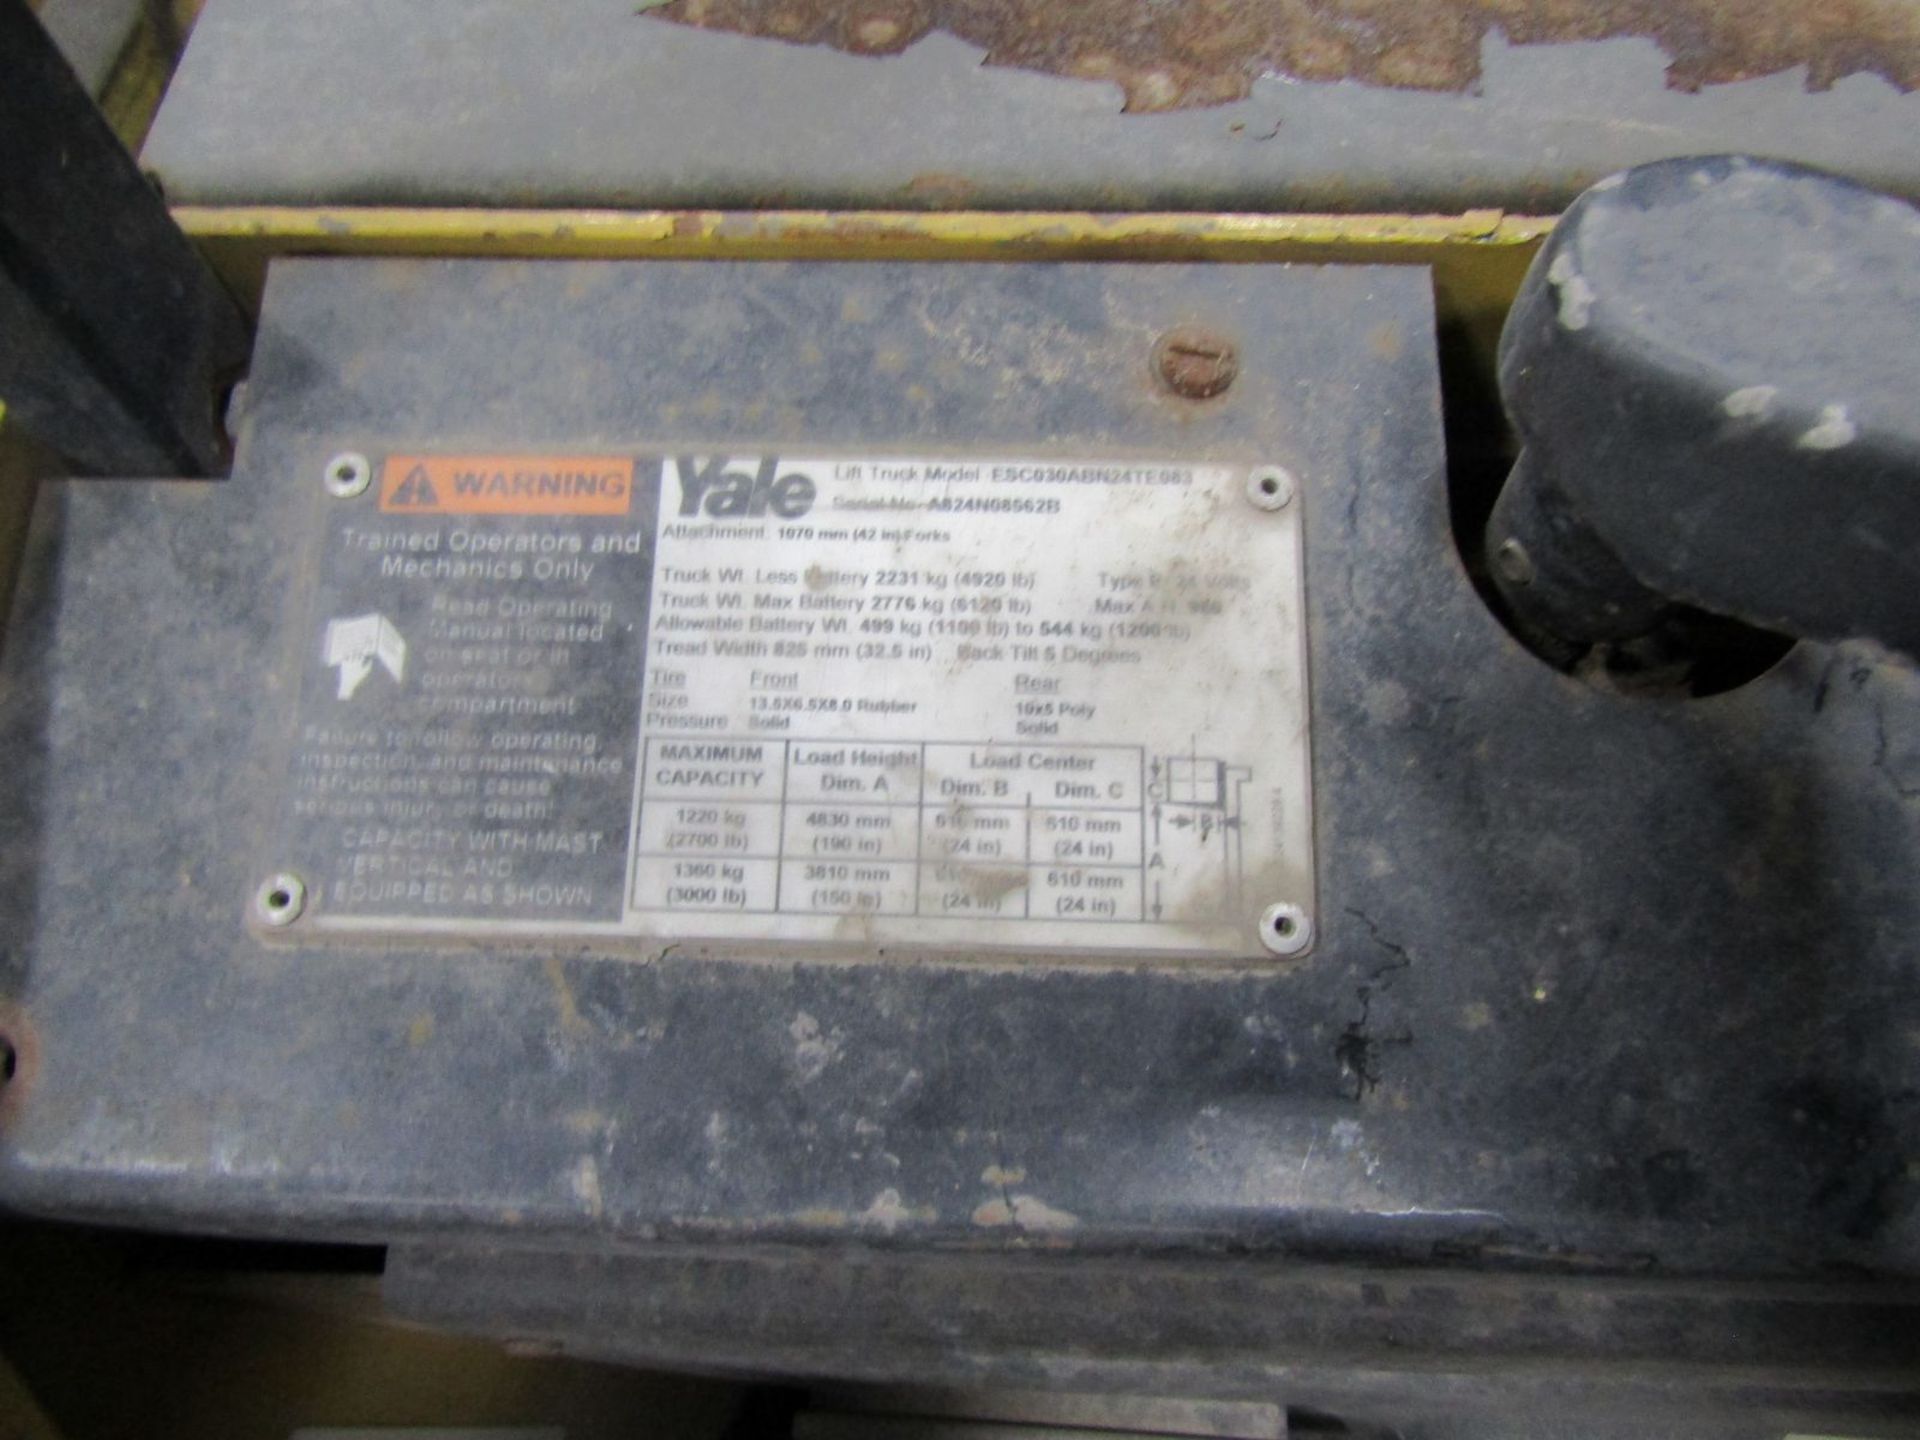 Yale 3,000 lb. Cap. Model ESC030ABN24TE083 Electric Stand-Up Fork Lift Truck, S/N: A624N08562B; 24- - Image 7 of 7